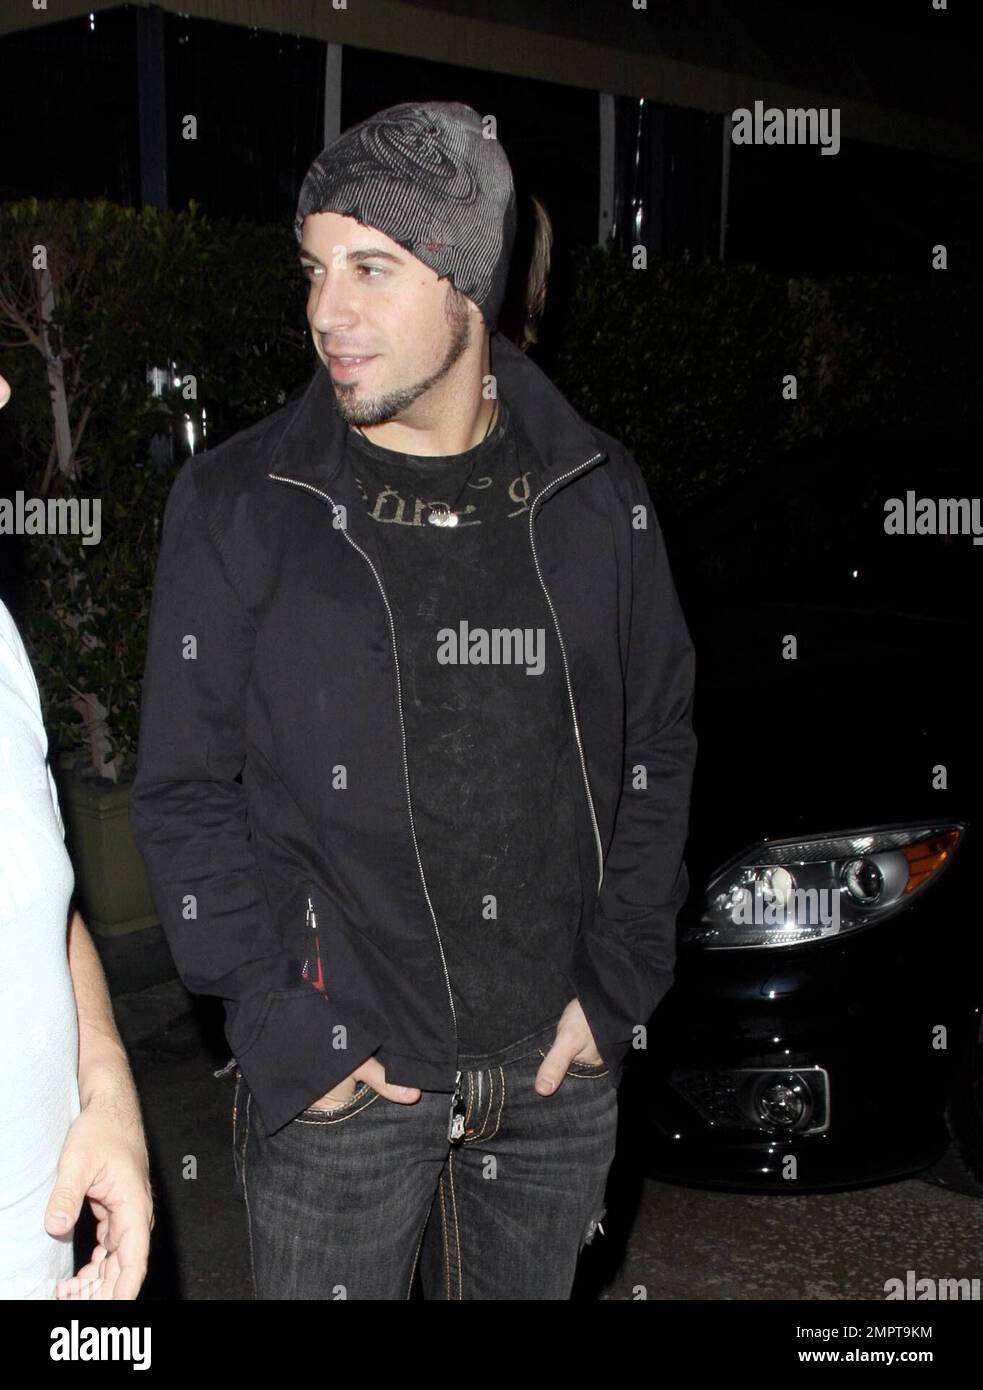 Exclusive!! Rocker and former 'American Idol' contestant Chris Daughtry leaves the restaurant Ago with a group of friends. When asked who he plans to vote for, he replied 'Chuck Norris.' Los Angeles, CA. 10/5/08. All Stock Photo